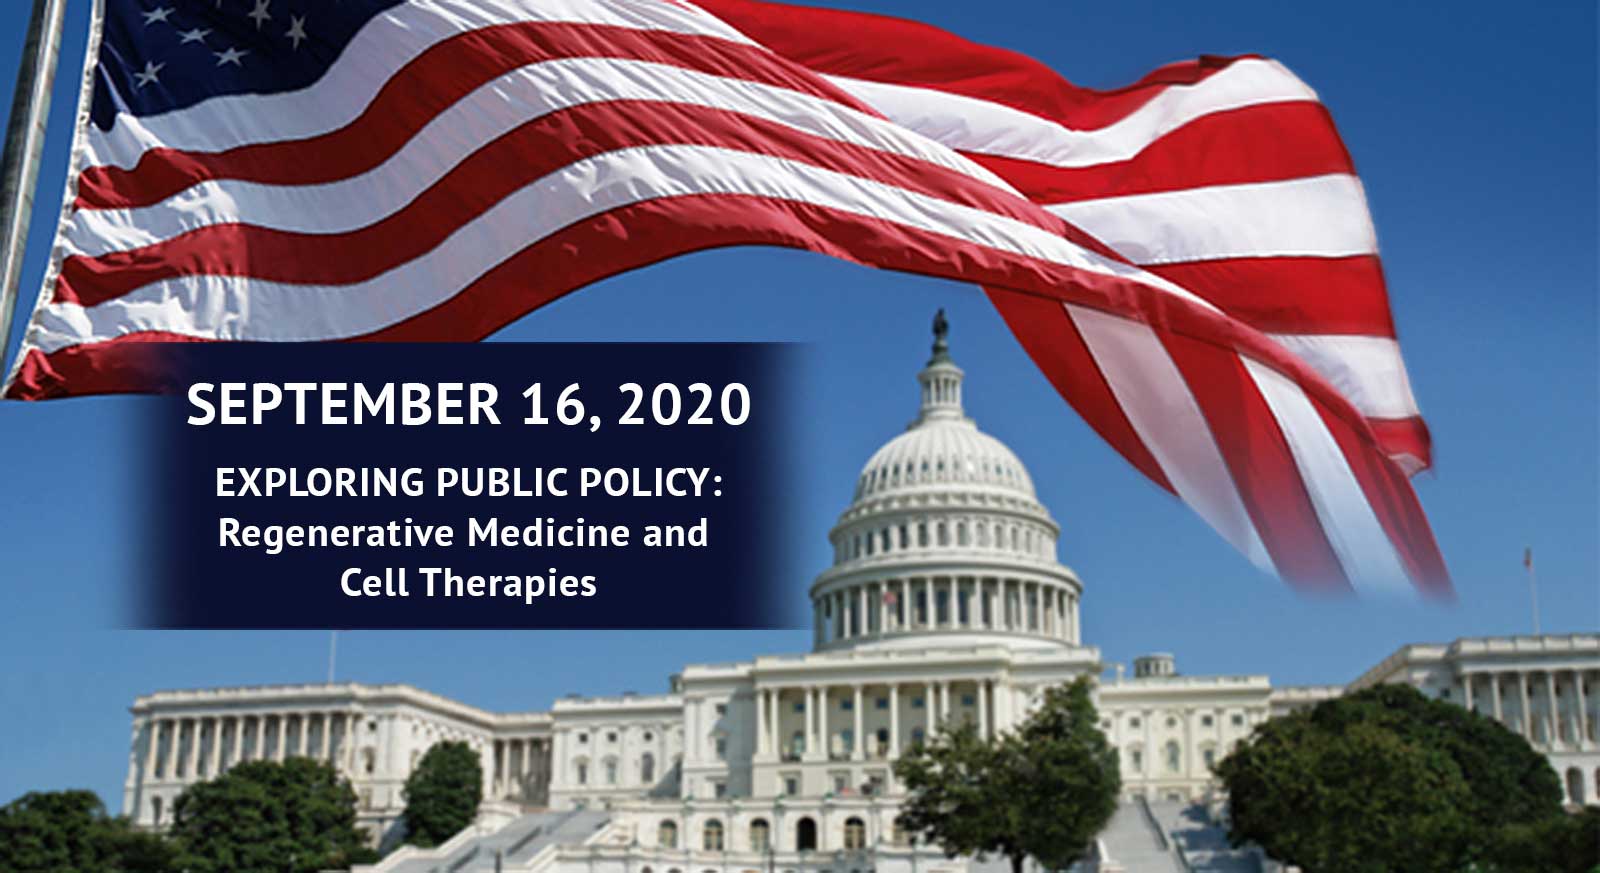 September 16 Event Explores Public Policy Issues Related to Regenerative Medicine and Cell Therapies